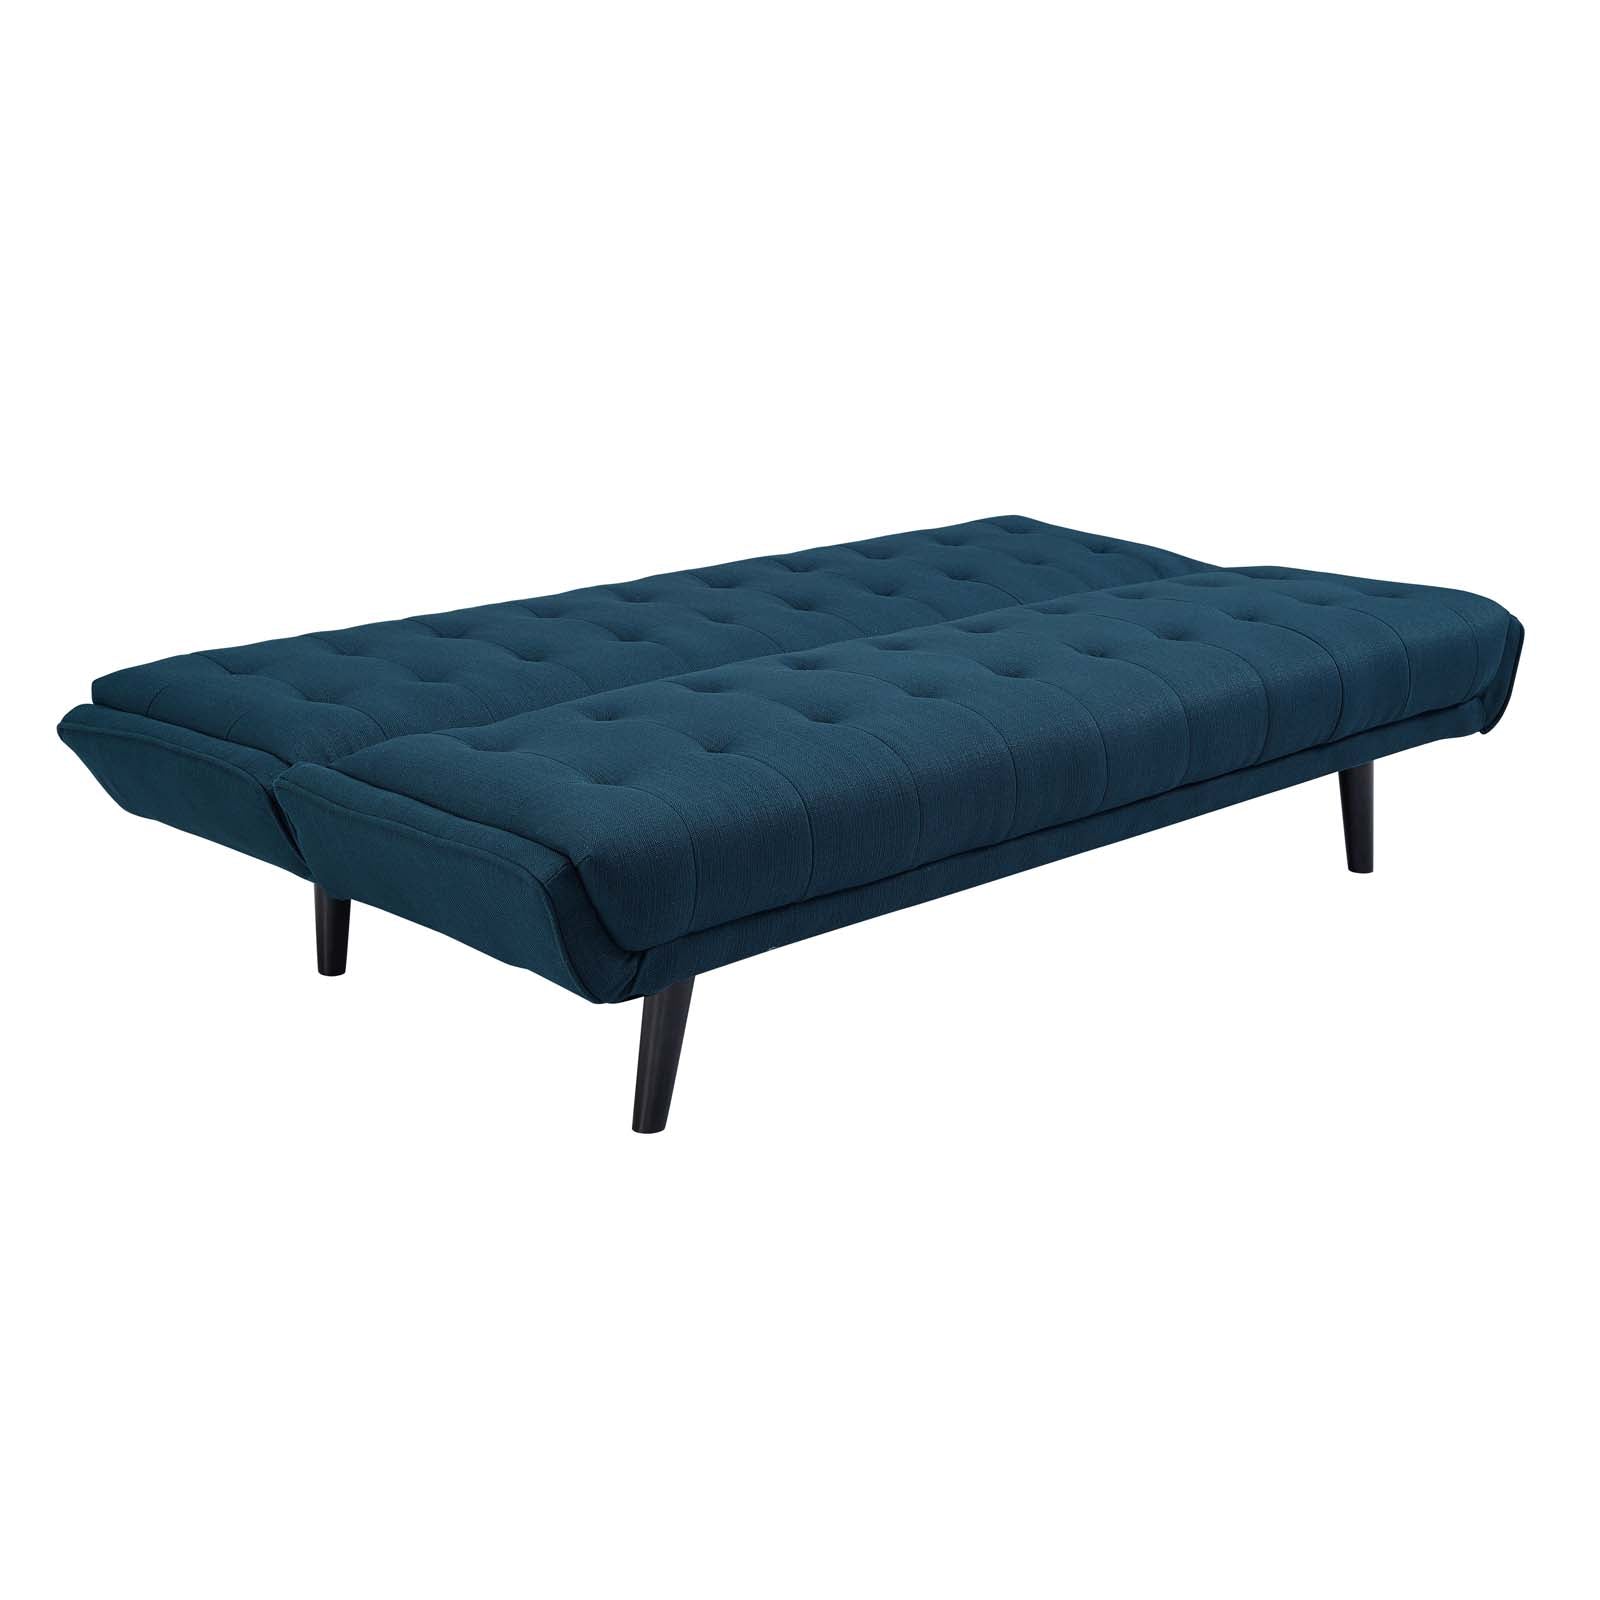 Modway Sofas & Couches - Glance Tufted Convertible Fabric Sofa Bed Azure